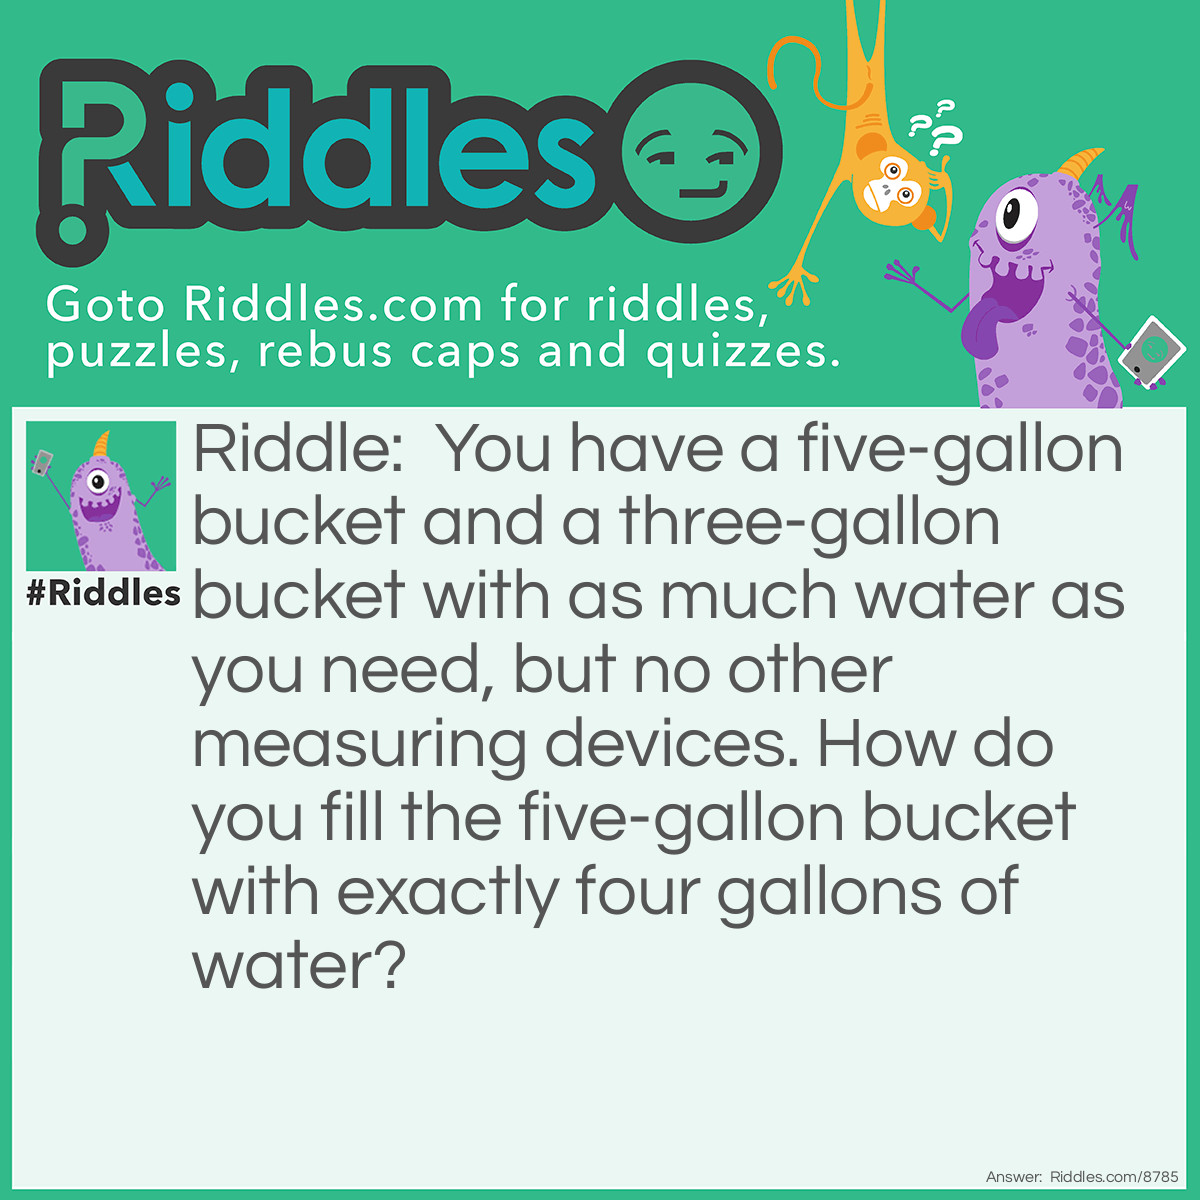 Riddle: You have a five-gallon bucket and a three-gallon bucket with as much water as you need, but no other measuring devices. How do you fill the five-gallon bucket with exactly four gallons of water? Answer: Fill the five-gallon bucket all the way up. Pour it into the three-gallon bucket until it is full. Empty the three-gallon bucket. Pour the remaining two gallons into the three-gallon bucket. Fill the five-gallon bucket all the way up, then finish filling the three-gallon bucket, leaving four gallons in the five-gallon bucket.